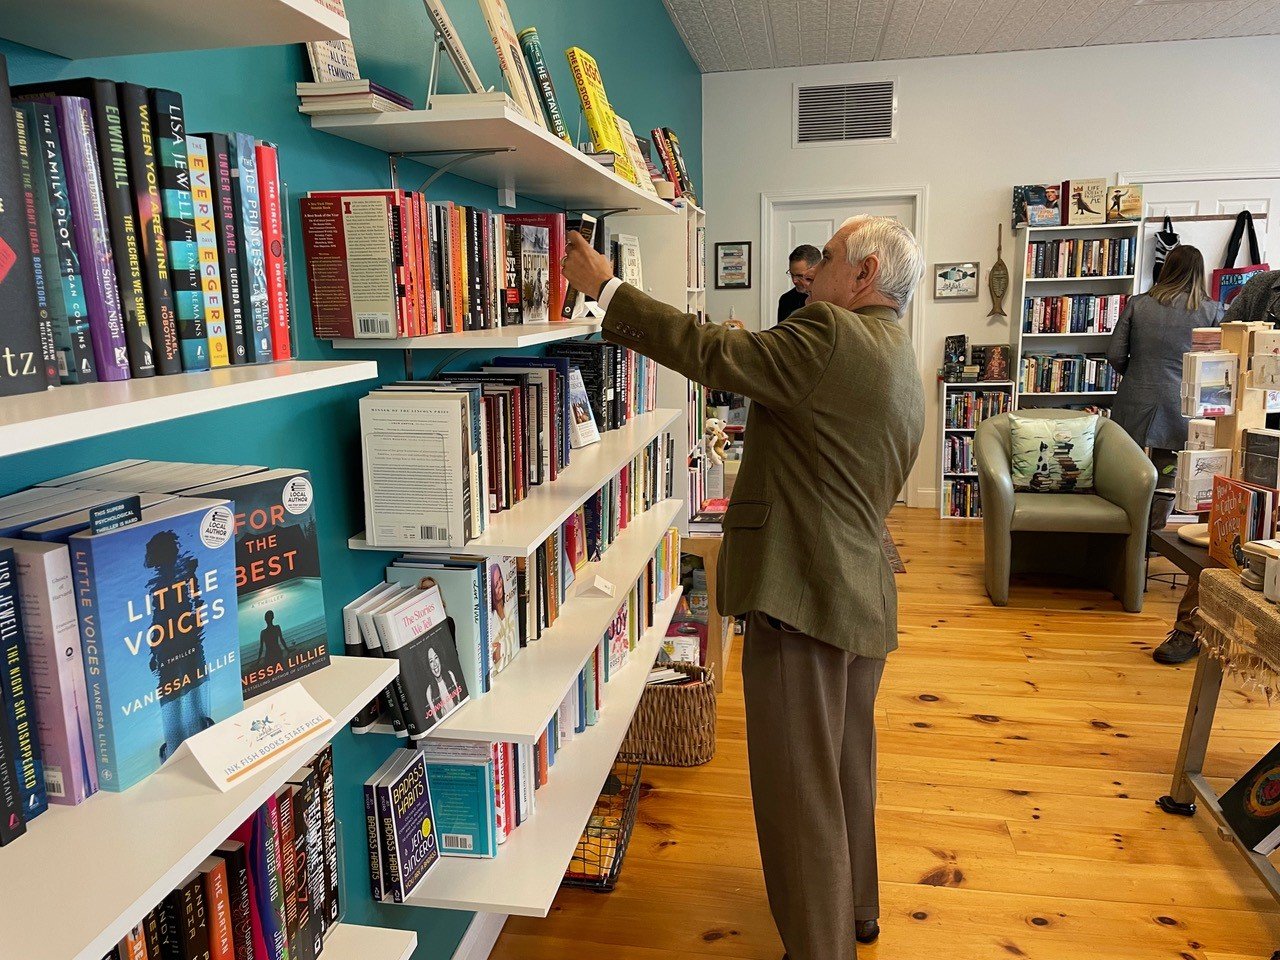 Senator Jack Reed takes stock of the selection at Ink Fish Books on Main Street.